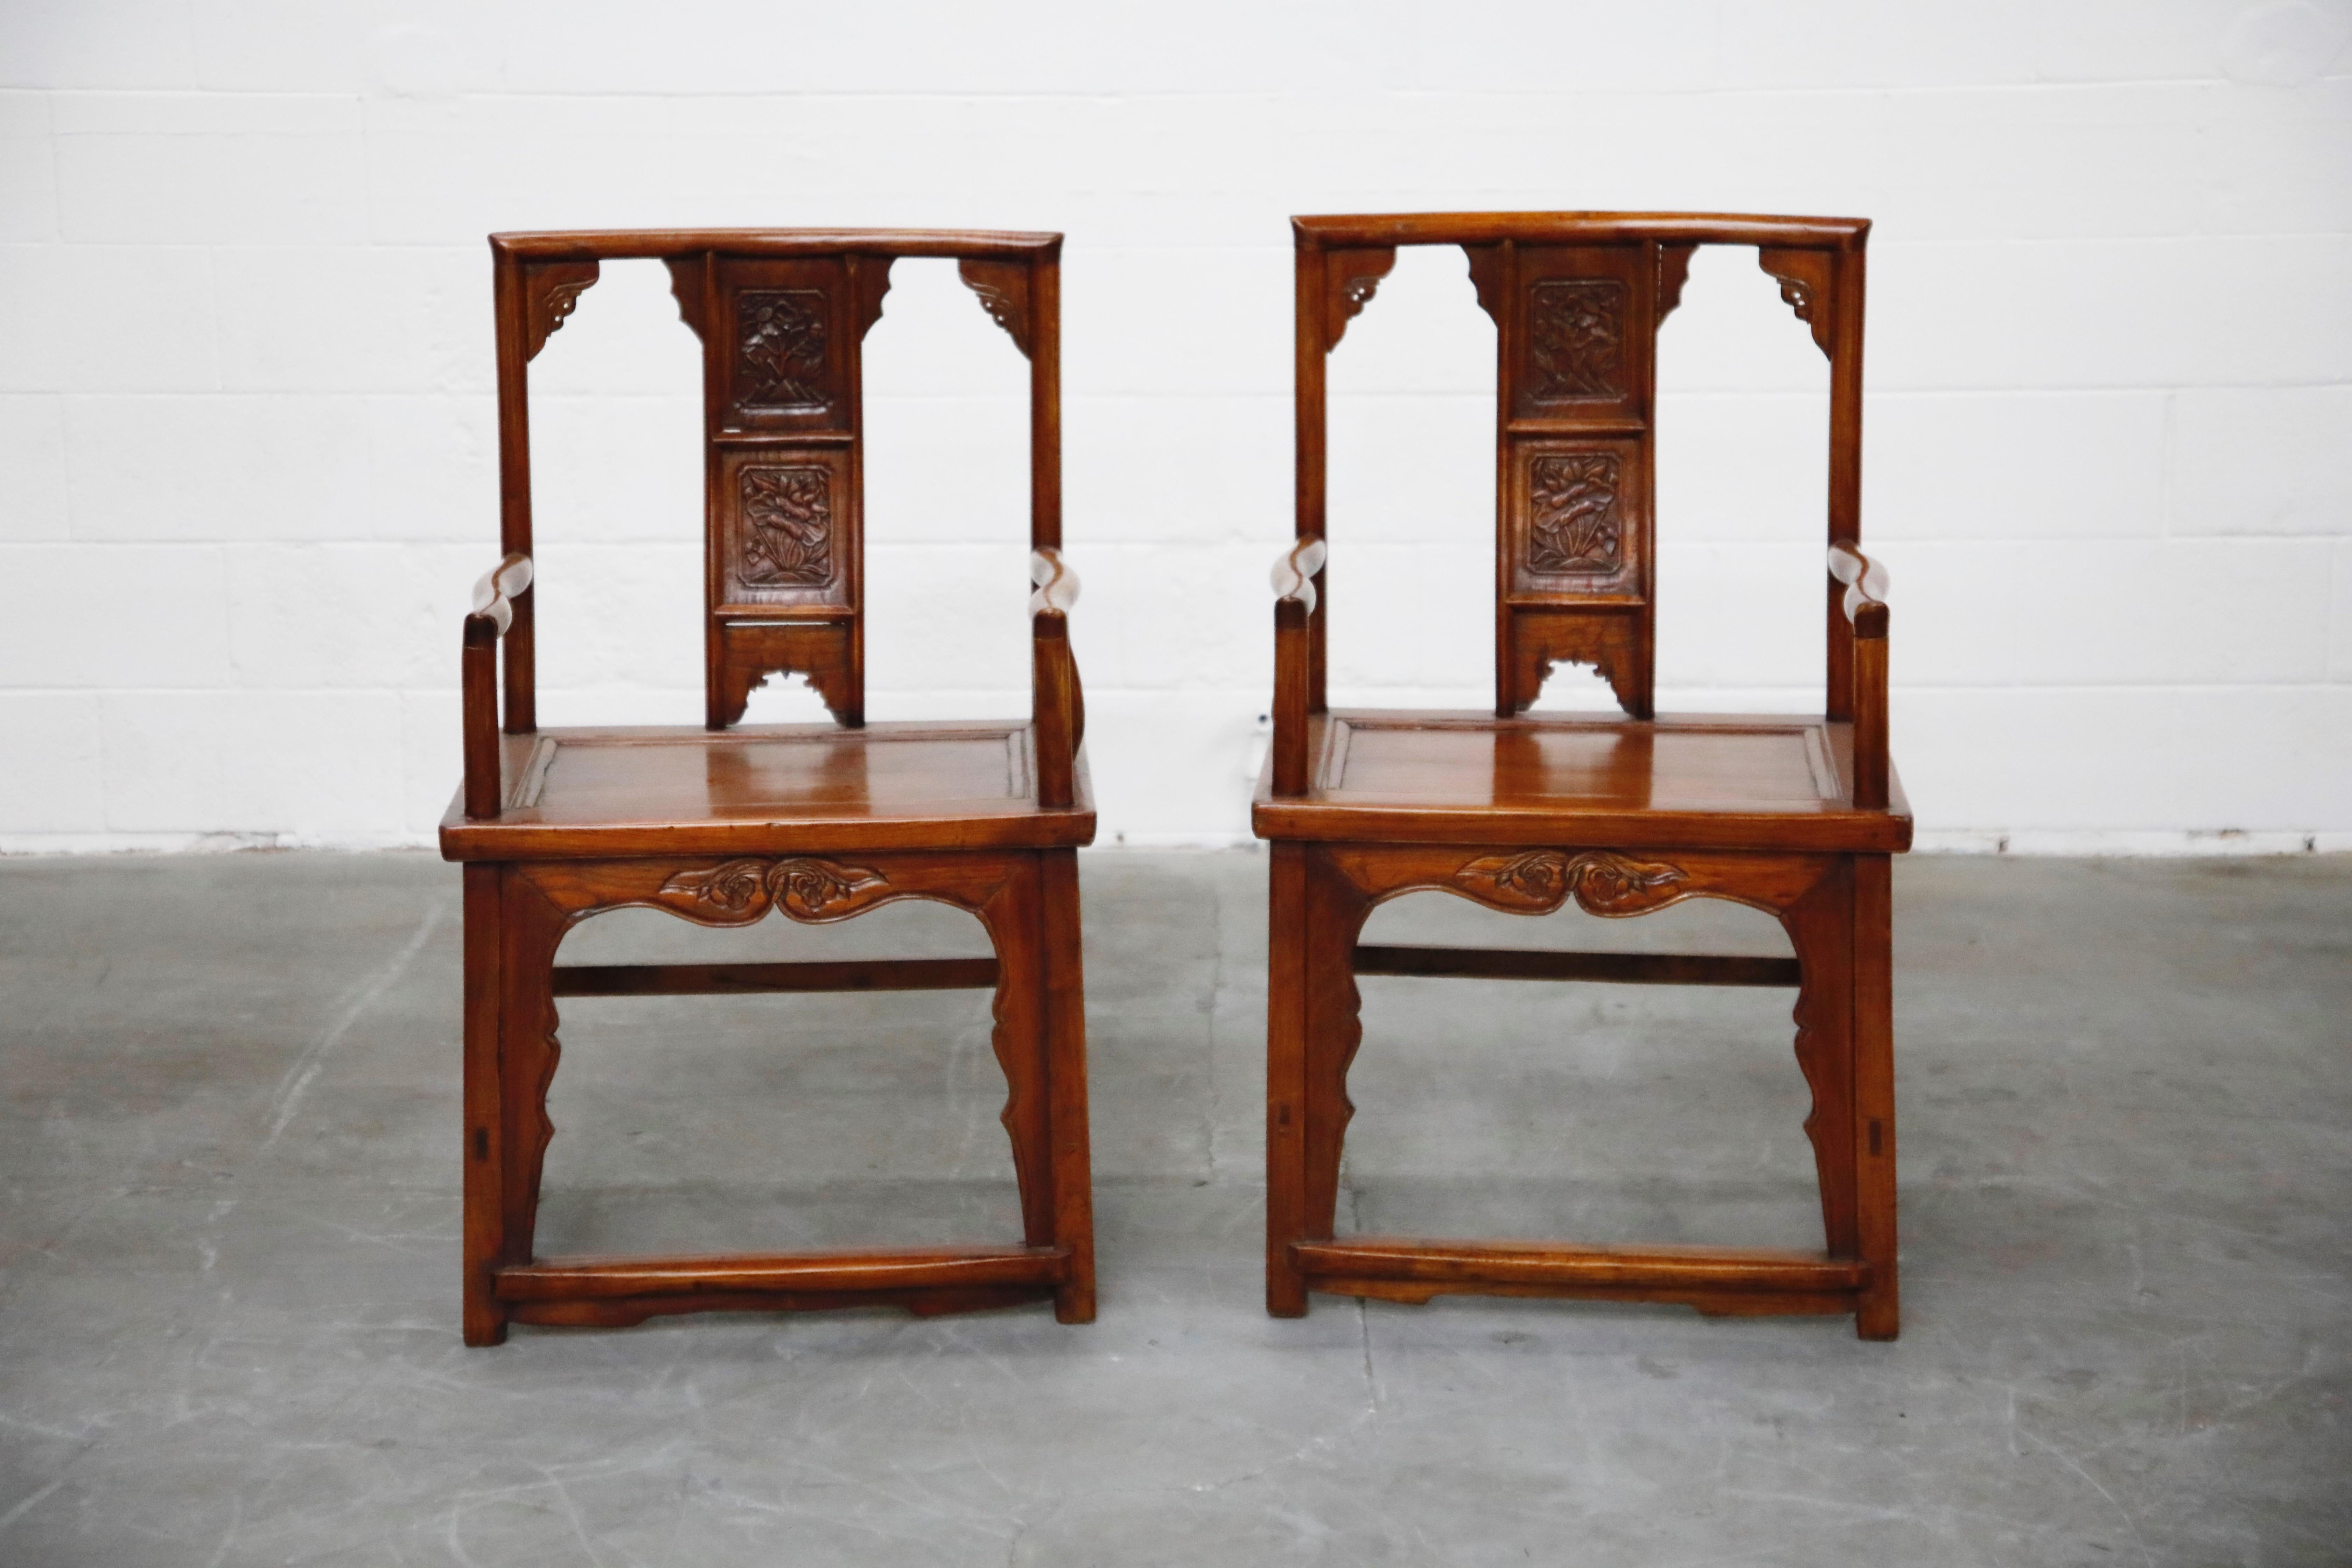 *MOVING SALE / NO RESERVE* Pair of beautifully carved Chinese armchairs. These noble looking chairs have been expertly crafted, central splats which feature floral carvings that mirror one another. There are also etched embellishments of the seat